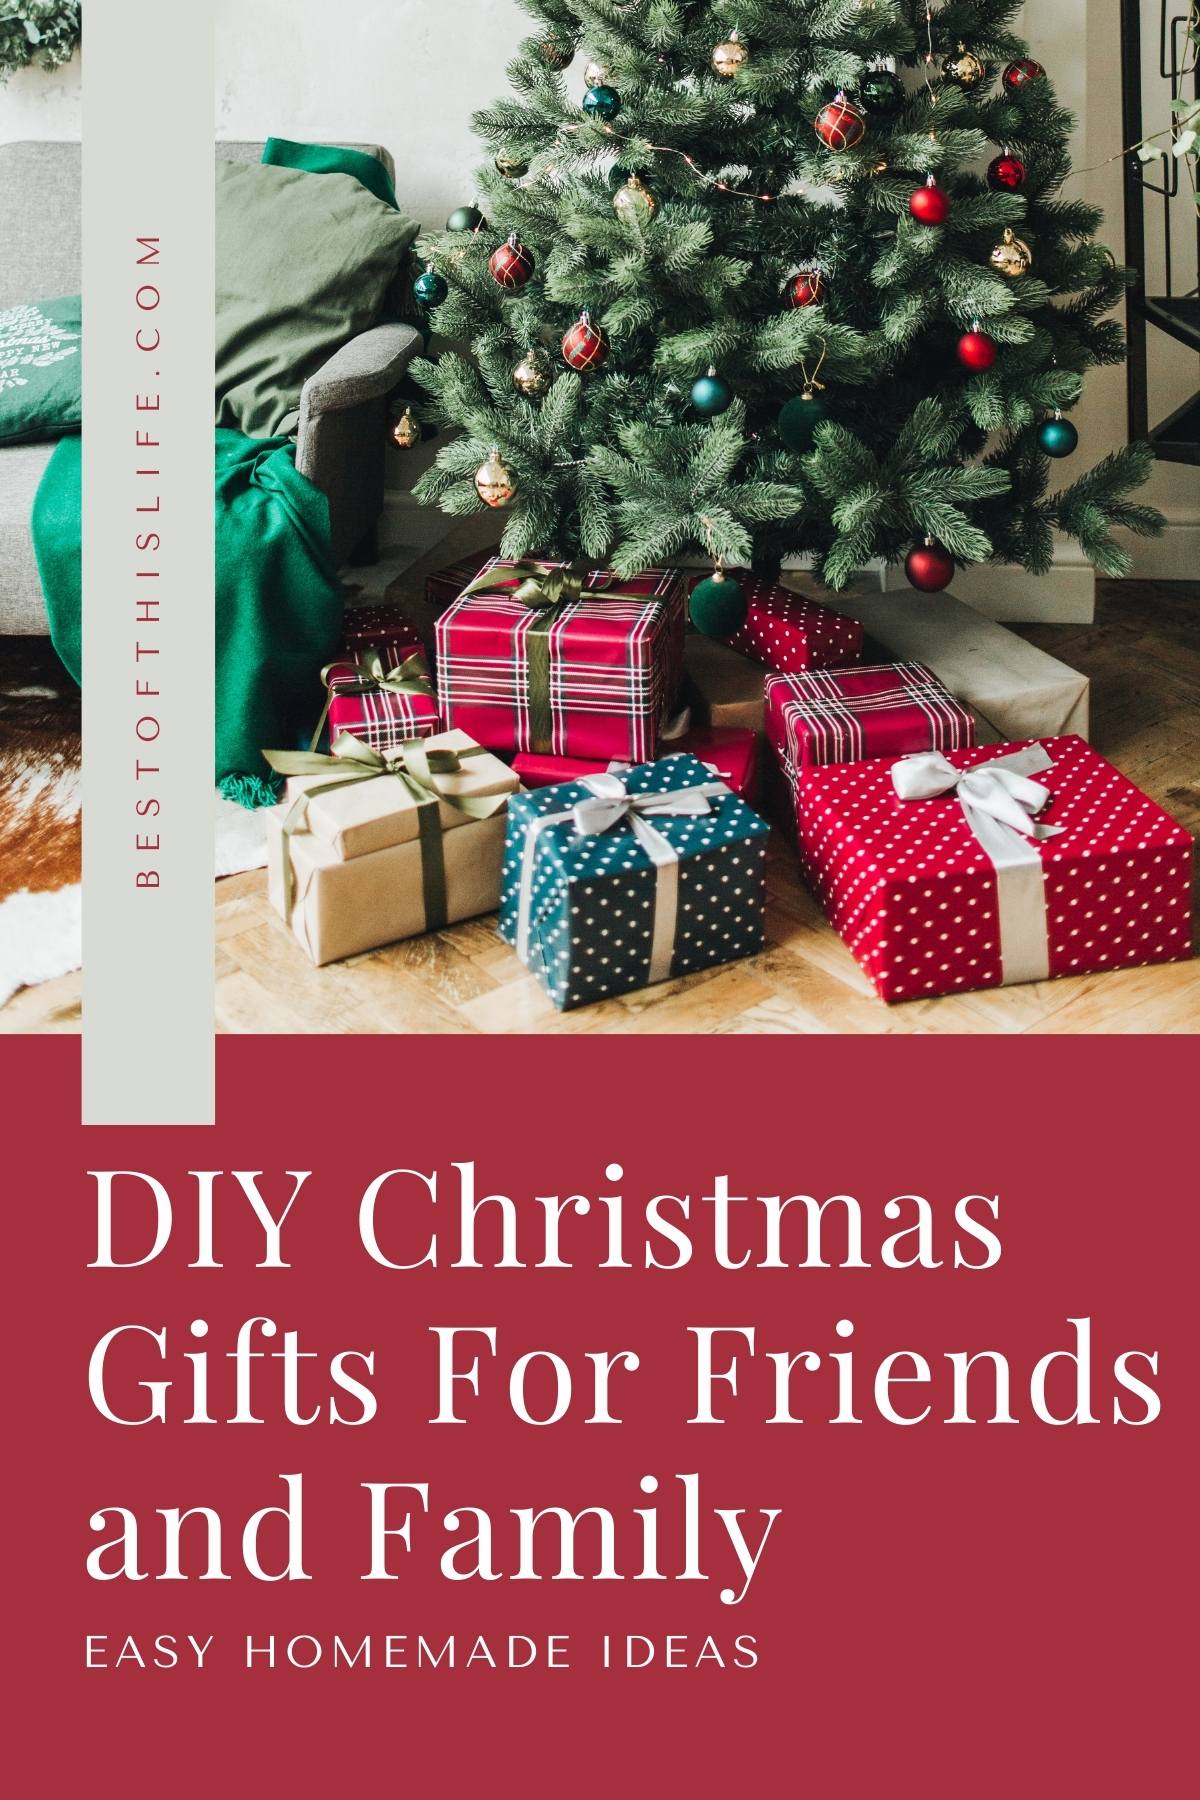 15 DIY Christmas Gifts for Best Friends - Hairs Out of Place